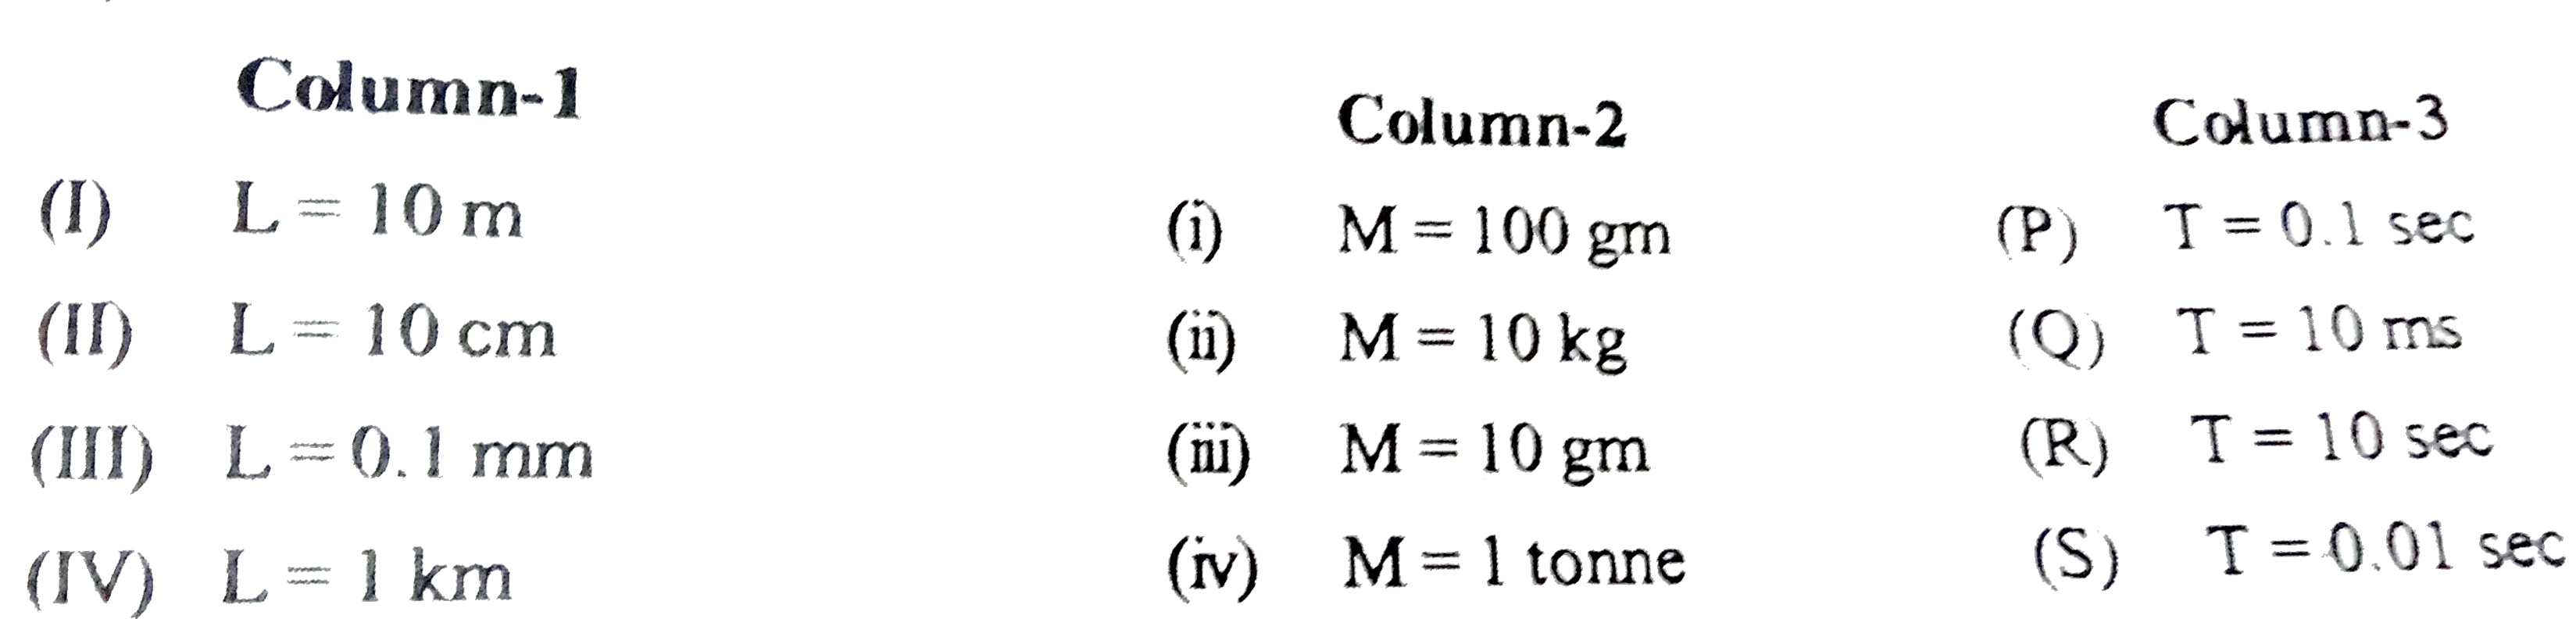 L,M and T are units of length, Mass and Time respectively in a system of units       In which of the following system unit of enery is 10^(9) erg